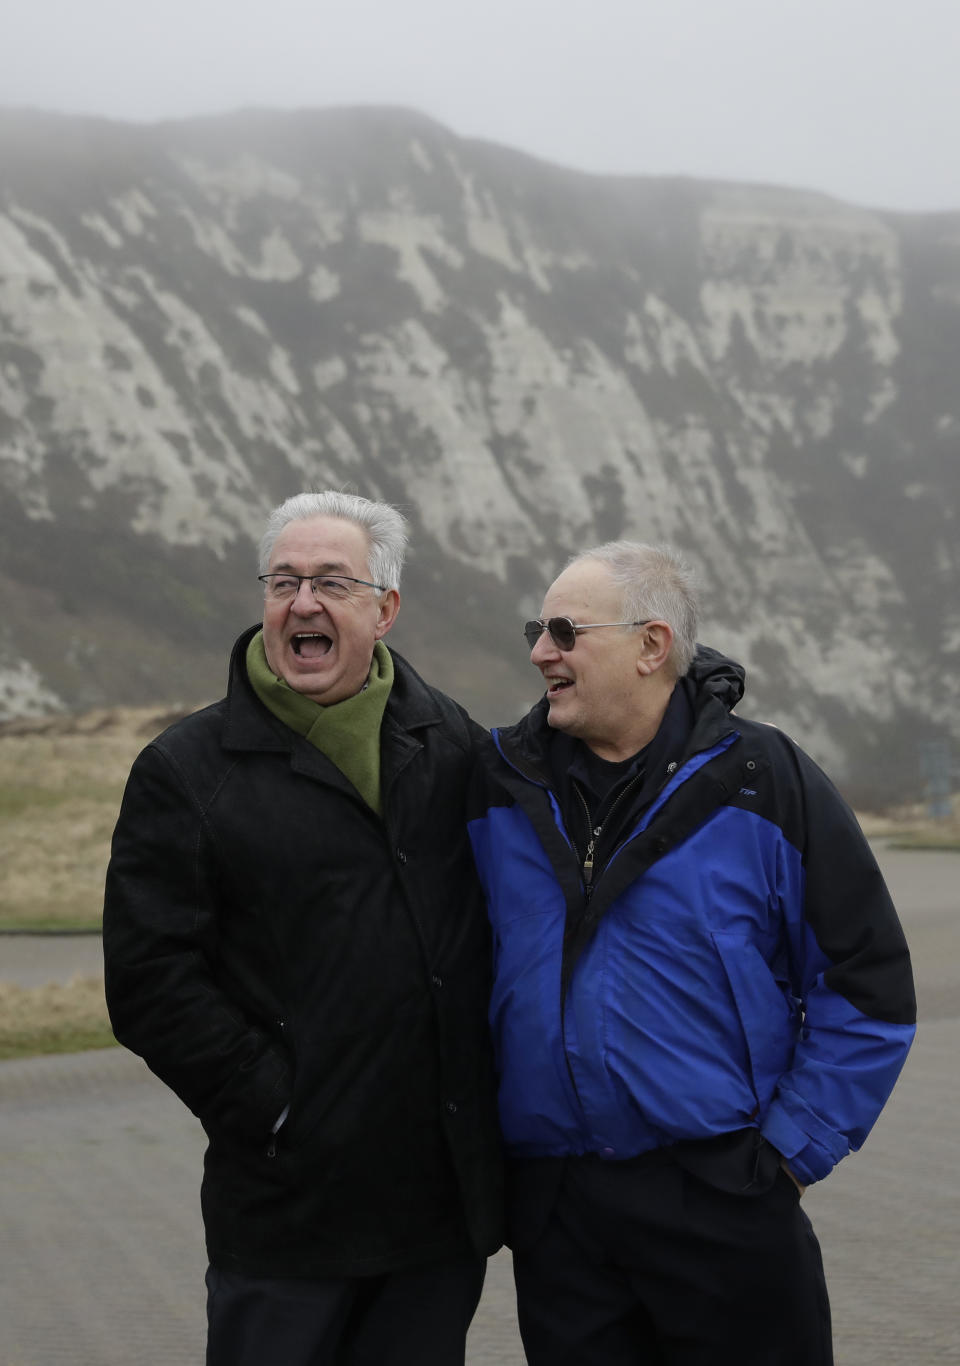 Former British Channel Tunnel worker Graham Fagg, right, and Former French Channel Tunnel worker Philippe Cozette pose for photographs together at Samphire Hoe, a site made from the disposal of the Channel Tunnel chalk marl spoil at the base of Shakespeare Cliff near Dover, England, after an interview with The Associated Press, Thursday, Jan. 30, 2020. By digging their way to each other deep under the English Channel, tunnelers Graham Fagg and Philippe Cozette became symbols for British-French friendship when they made the first breakthrough in the Channel Tunnel nearly 30 years ago. (AP Photo/Matt Dunham)